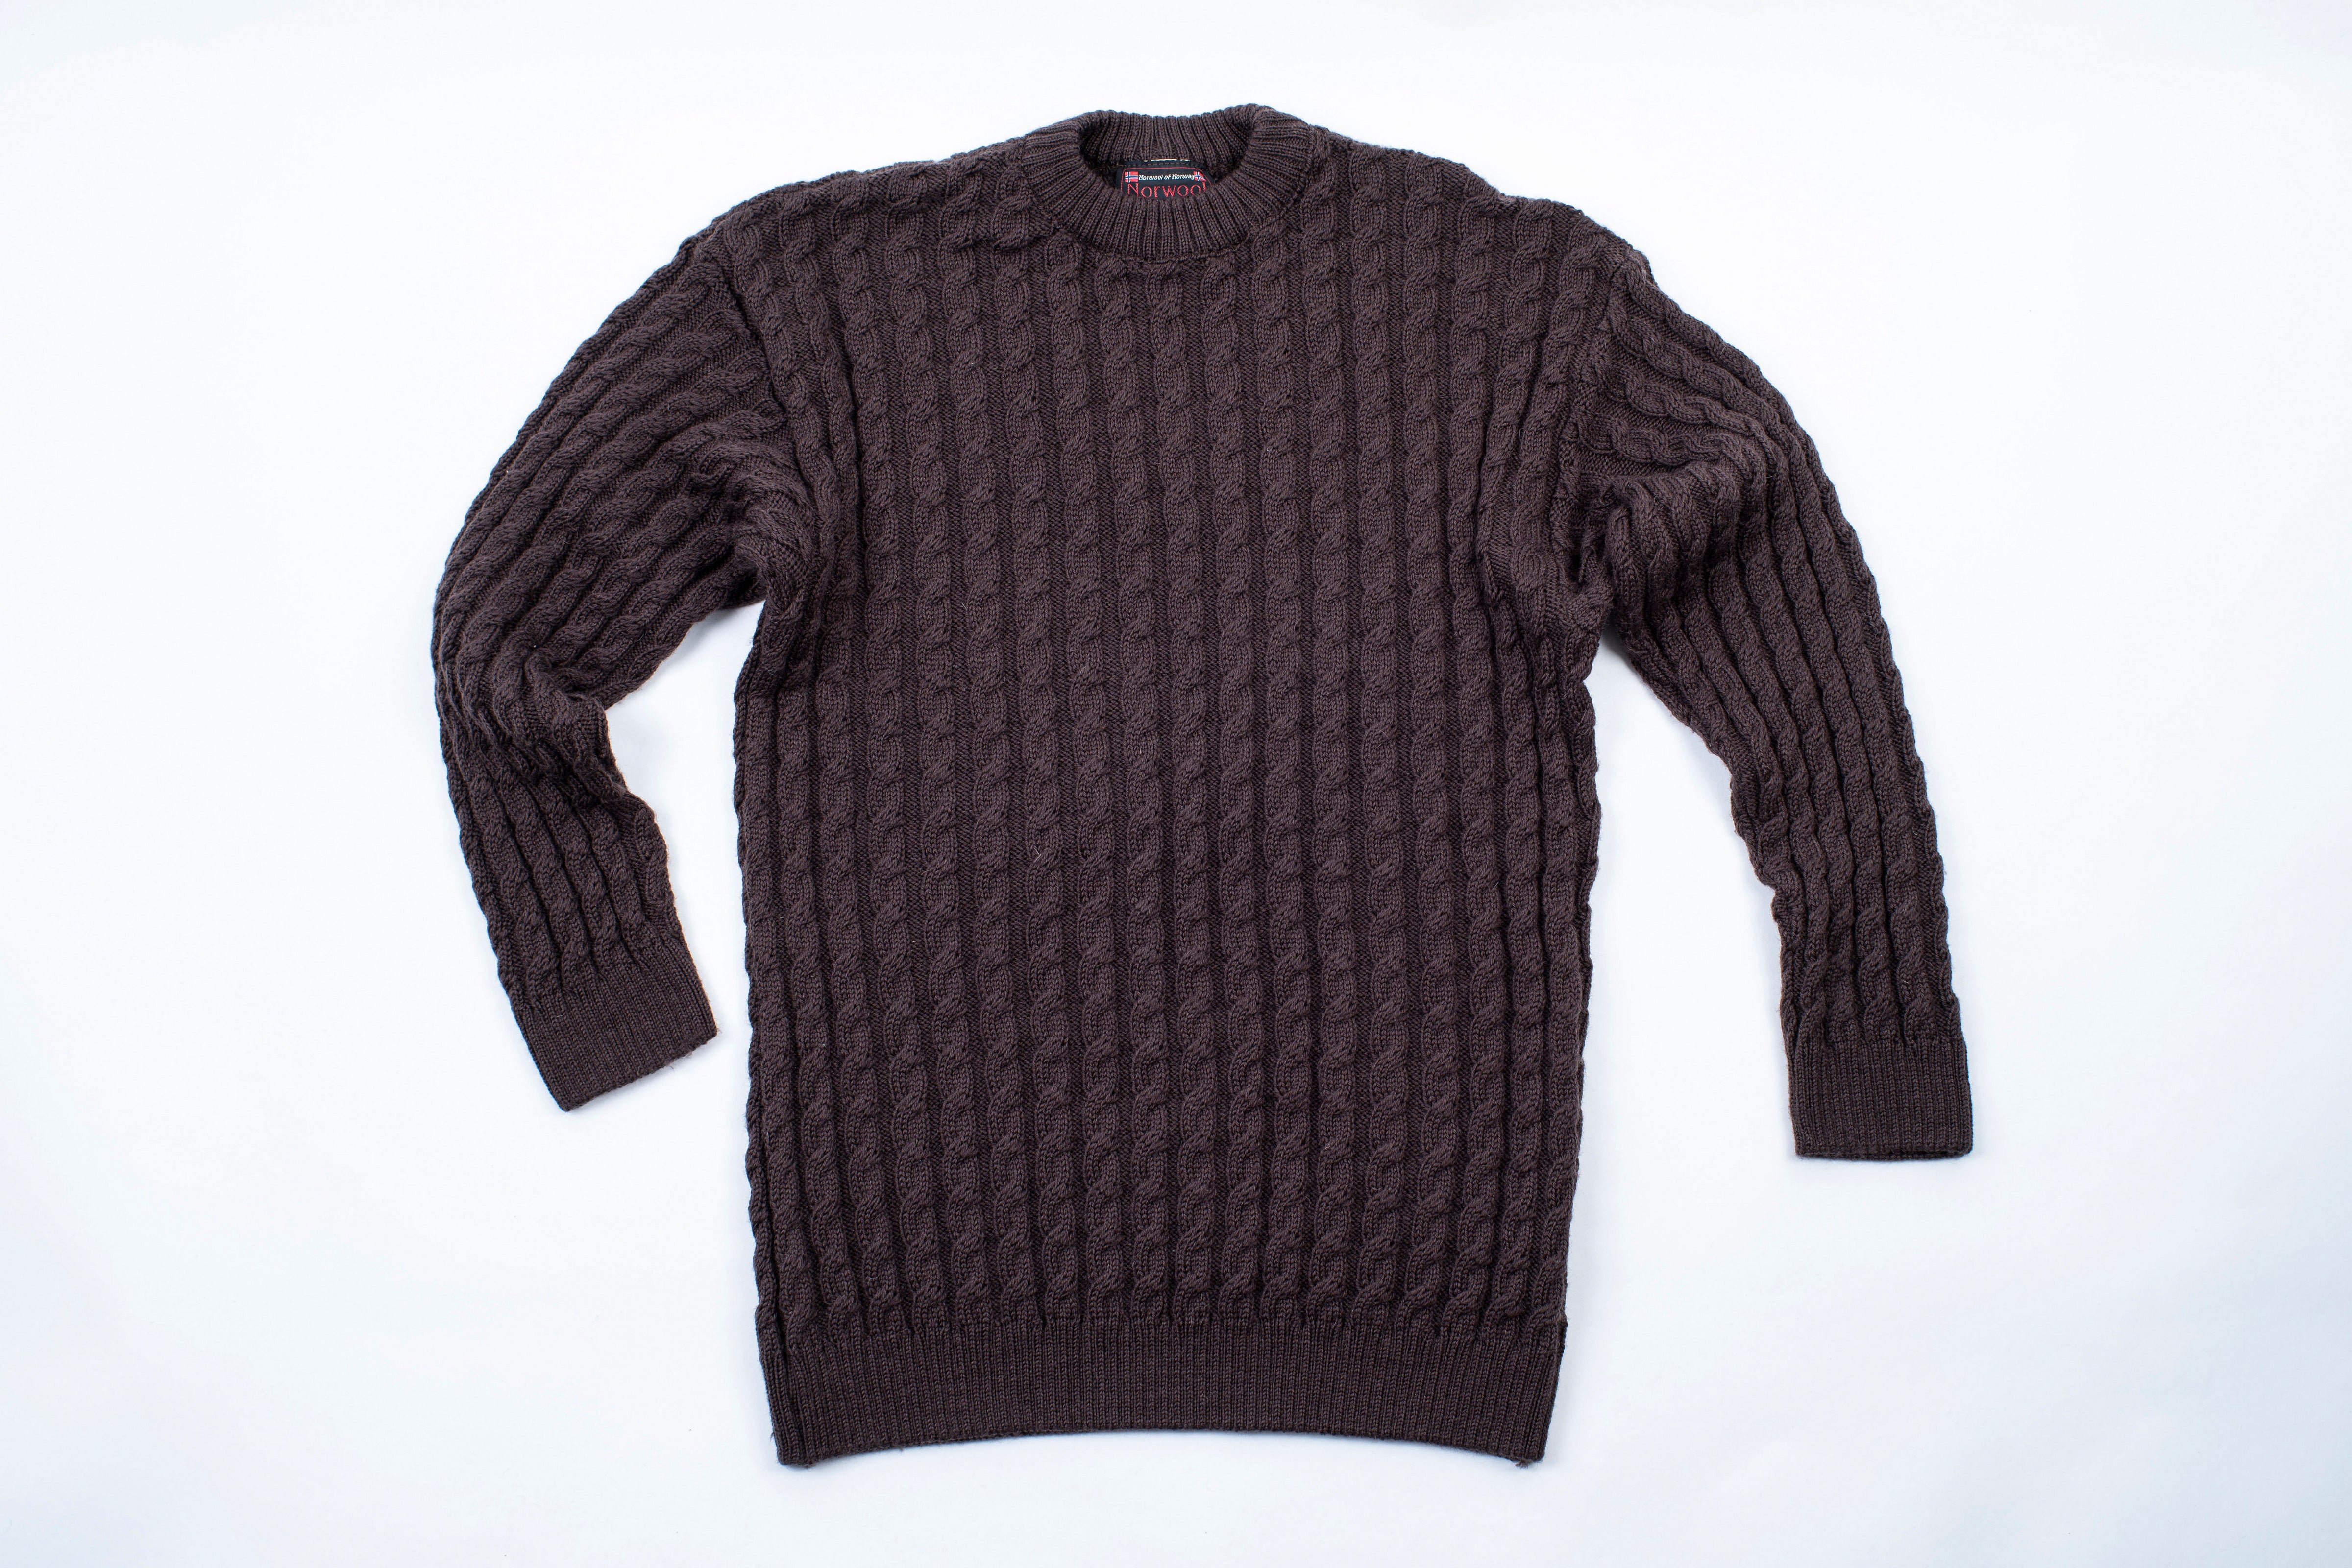 Norwool Men's Brown Cable Knit Jumper, L